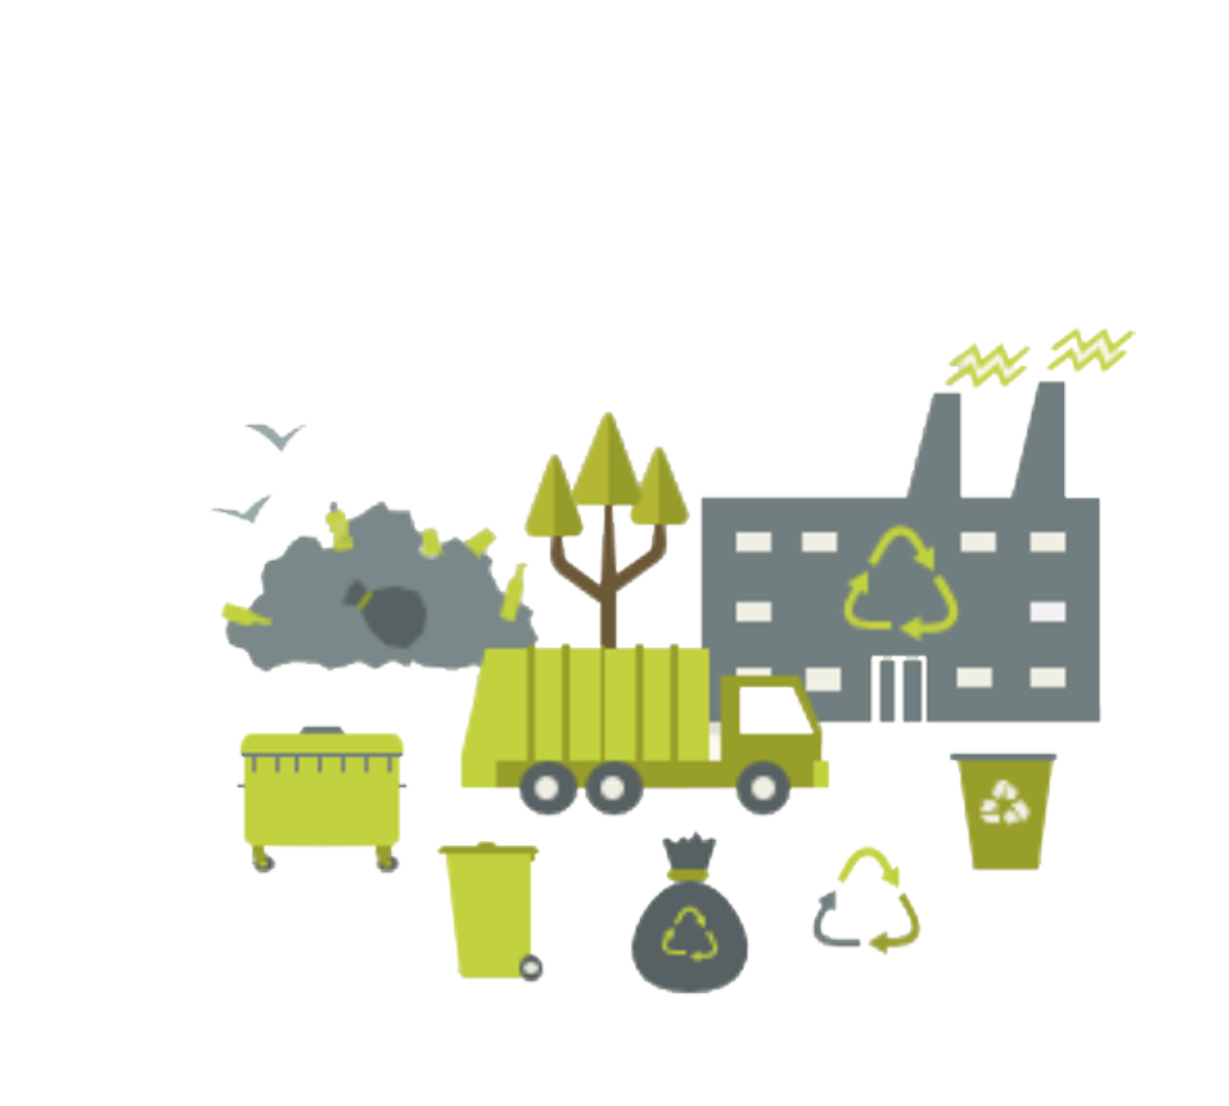 Bin Management Recycling Illustration Recycle Waste PNG Image